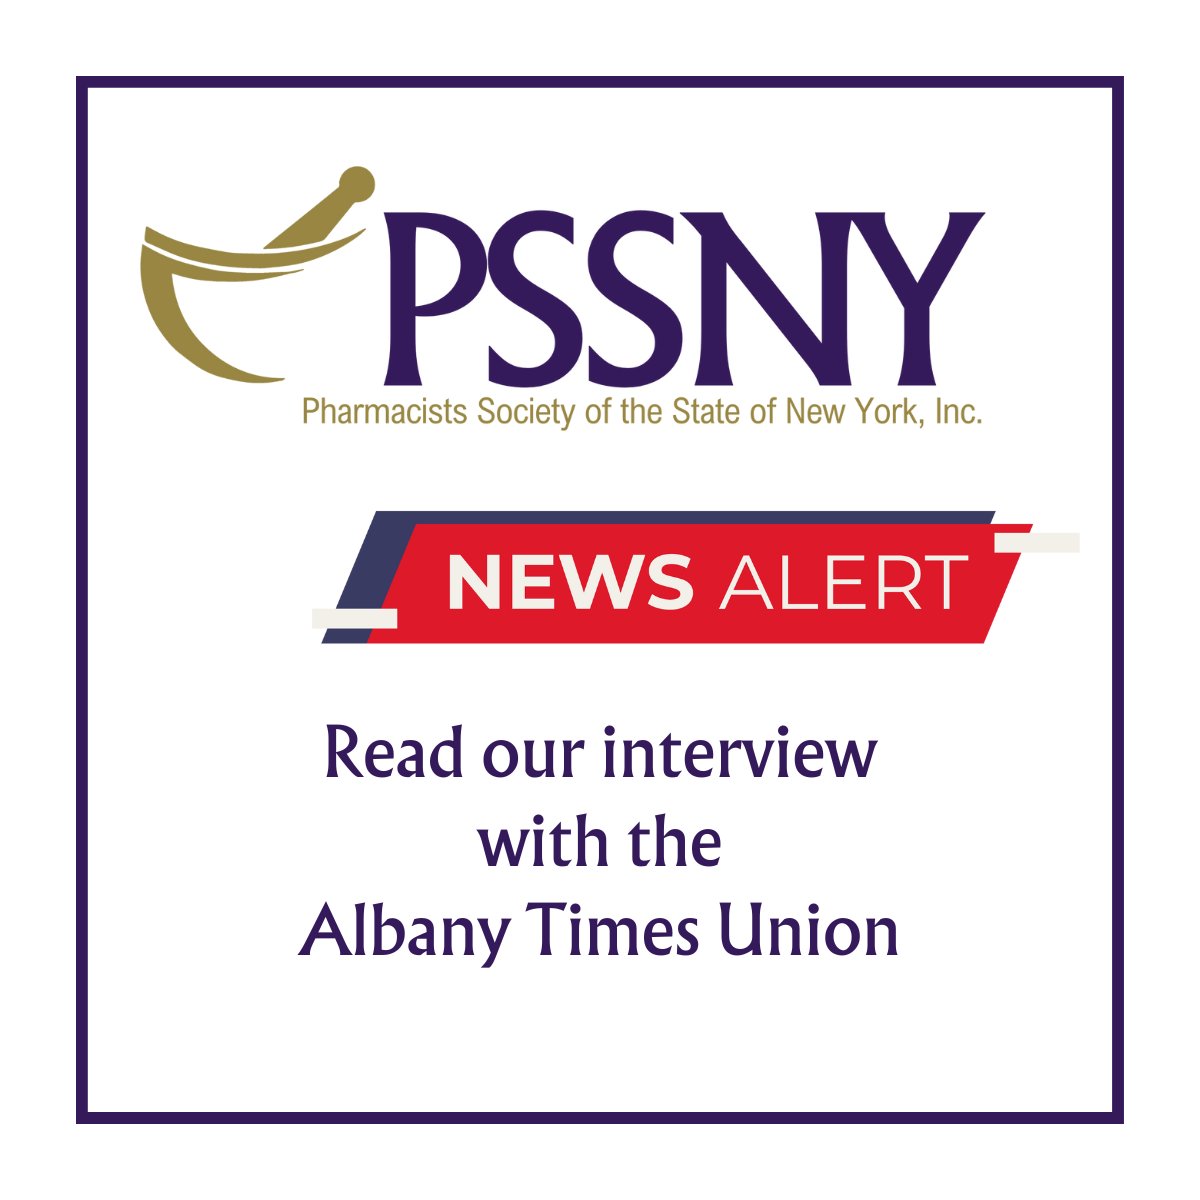 PSSNY Board Chair and Owner of Bartle’s Pharmacy Heather Ferrarese, PharmD was recently interviewed by the Albany Times Union to discuss the cyber attacks against Change Healthcare. Full story: loom.ly/TUuGLGg #PSSNY #NYPharmacists #ChangeHealthcare #InTheNews